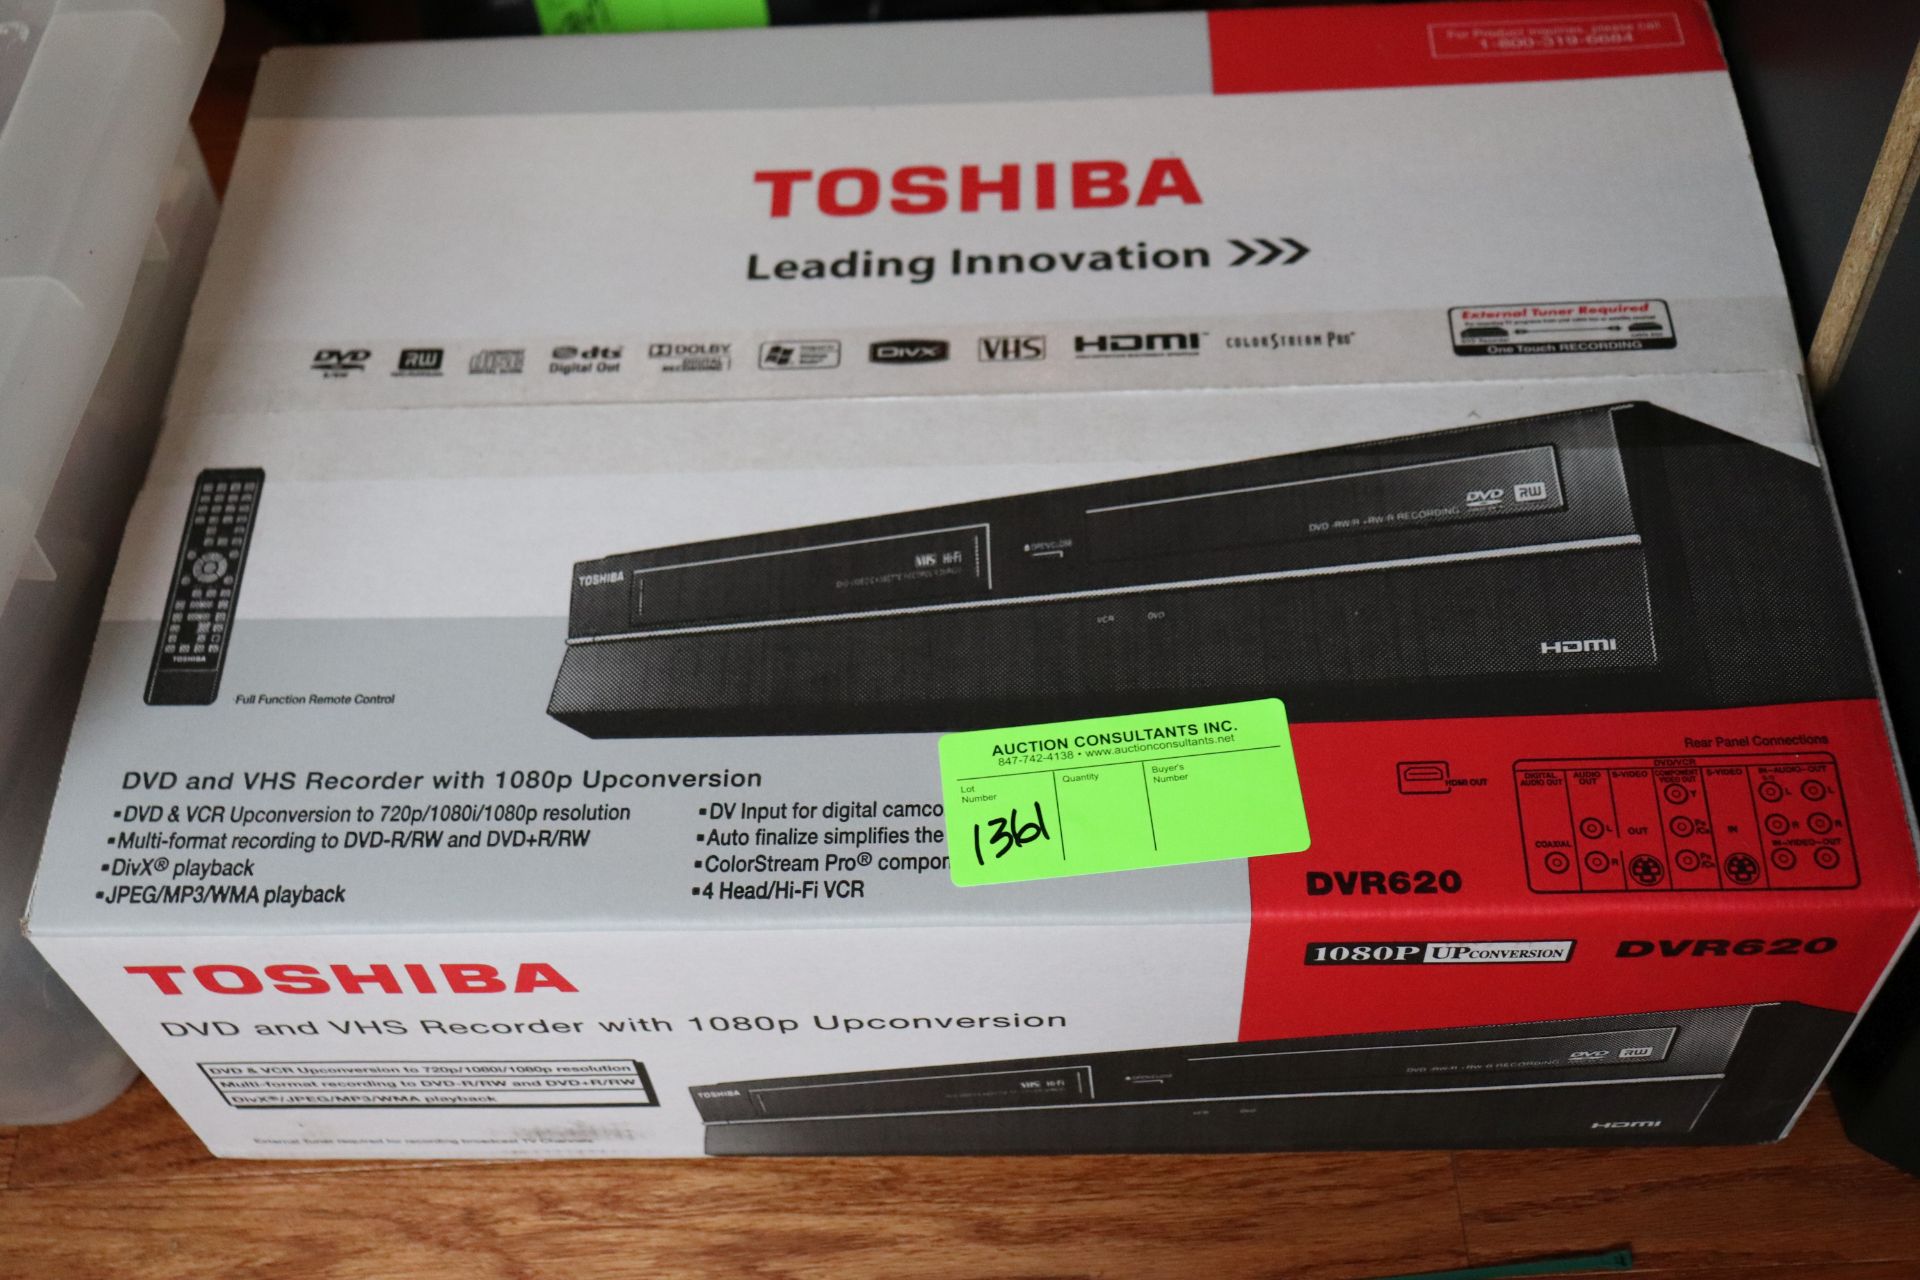 Toshiba DVD and VHS machine, model DVR620, new in box